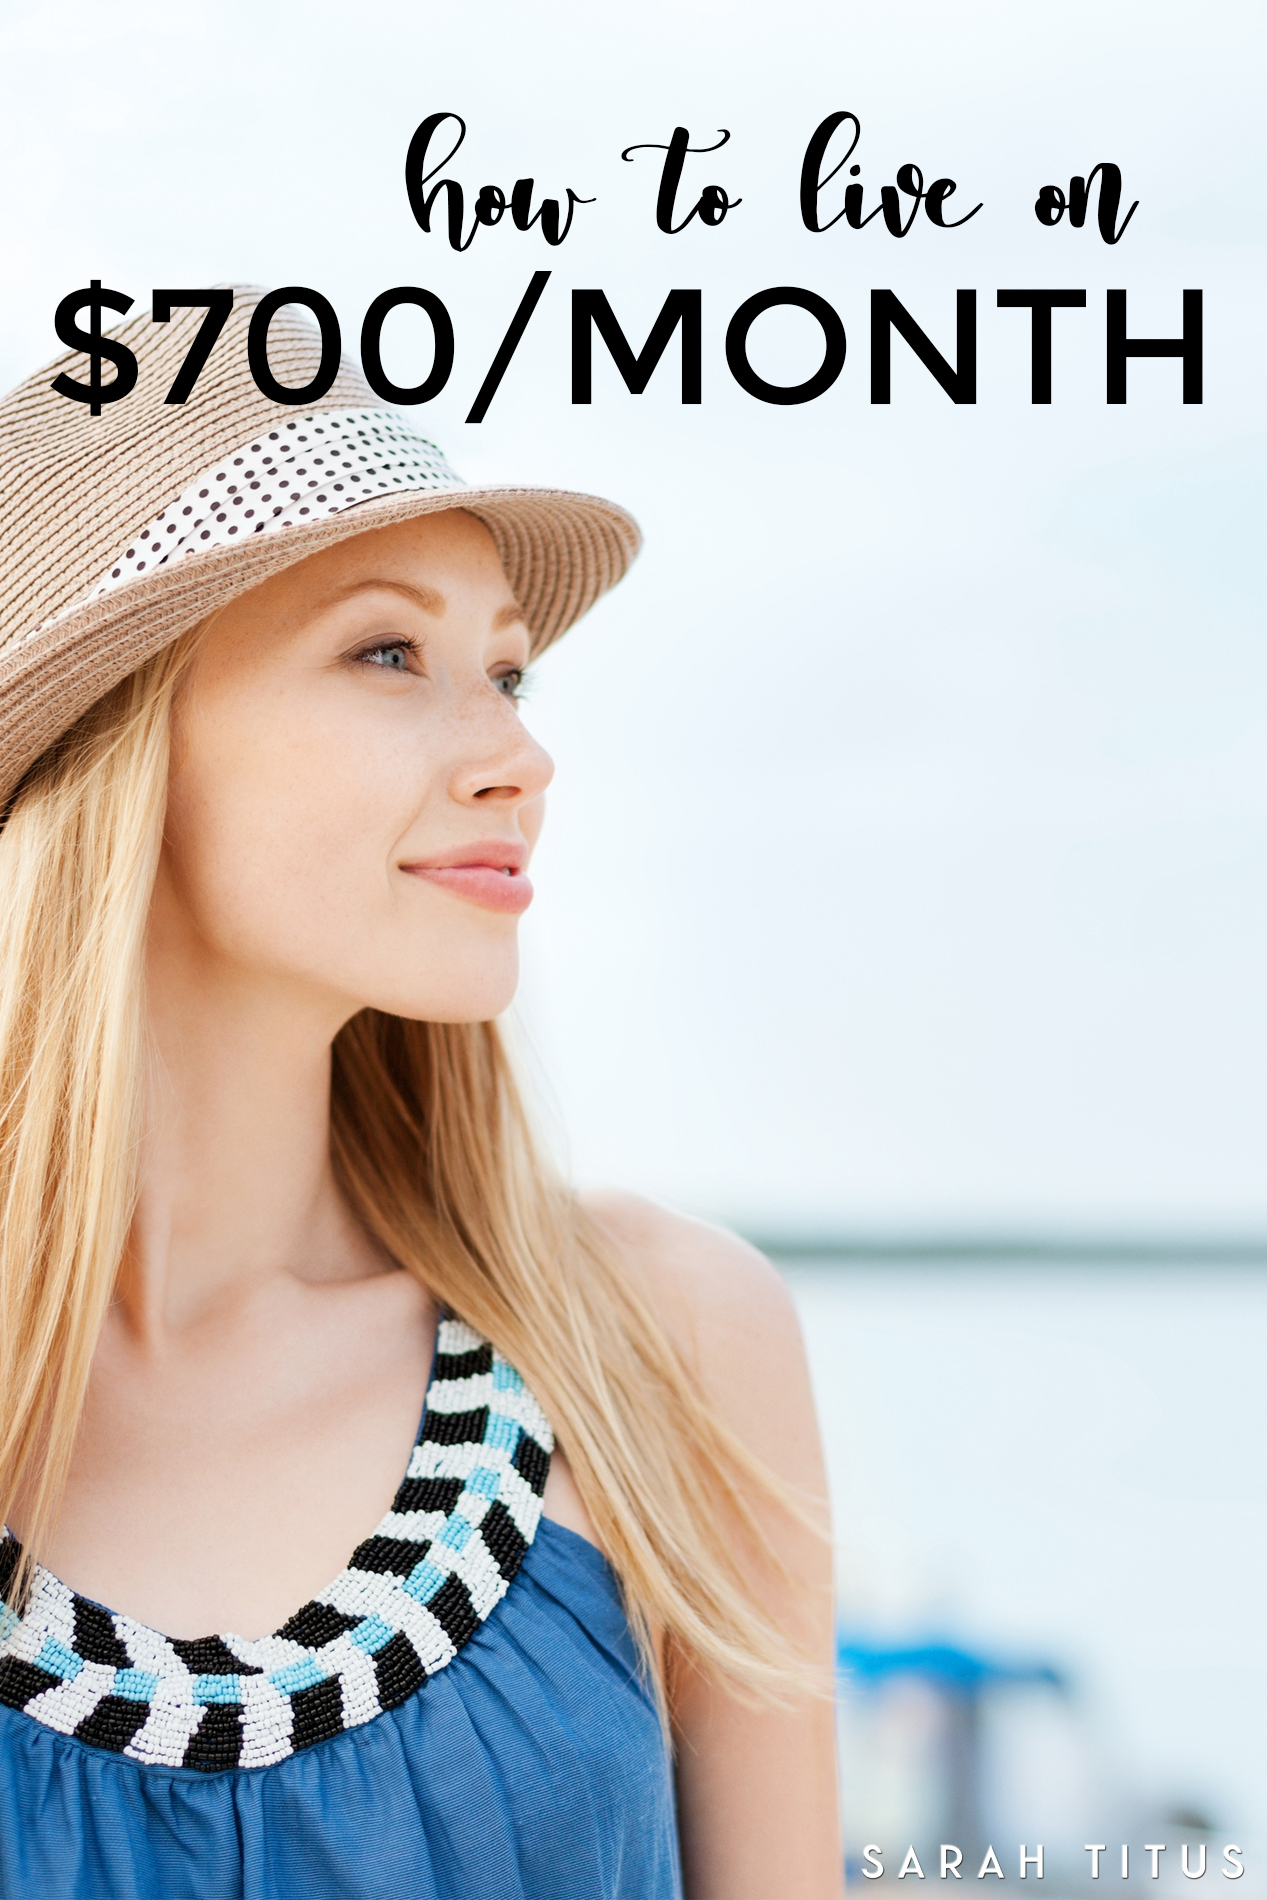 As a single SAHM, I live quite well on $18k/year...but it wasn't always that way. There was a time when I lived on just $700/month. Here's how I did it! How to live on $700 a month.